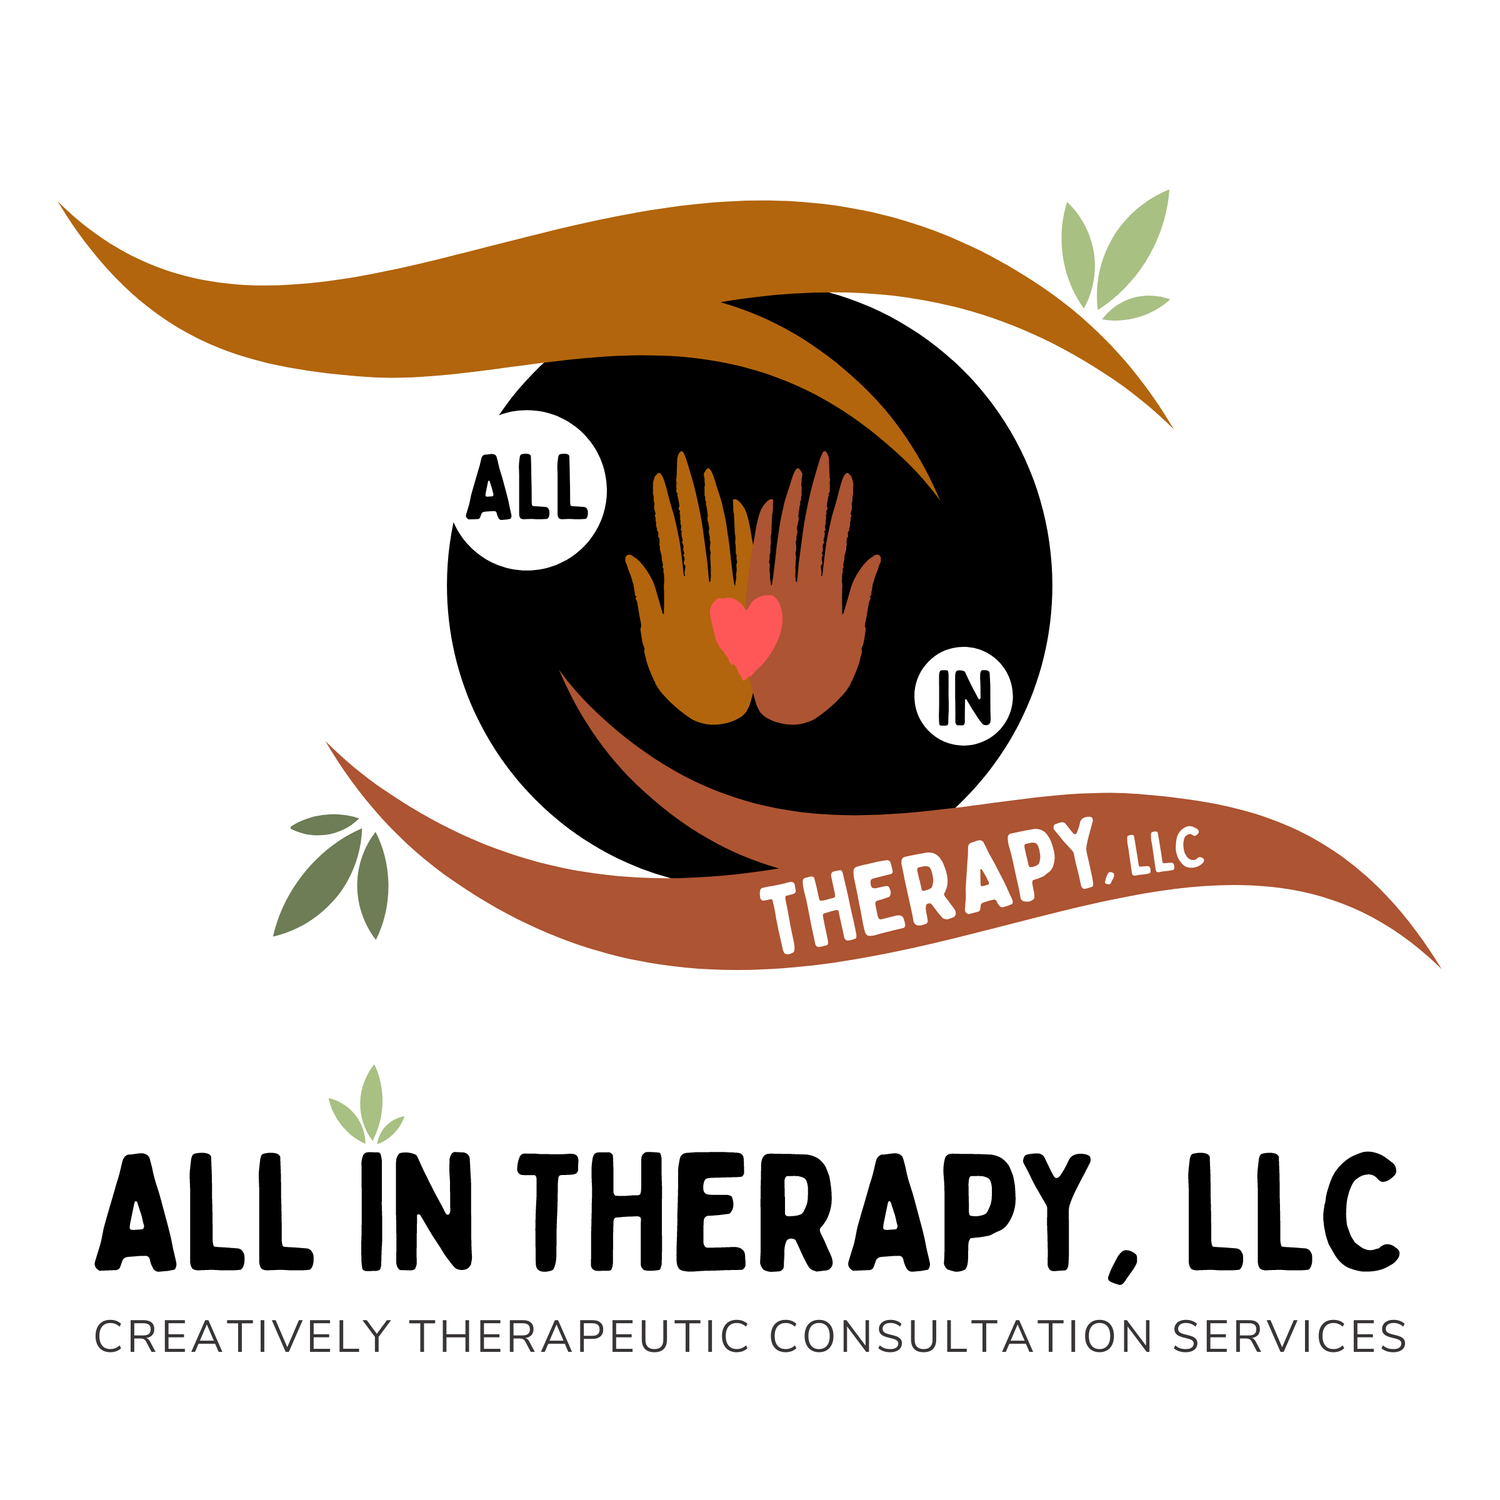 ALL IN THERAPY, LLC